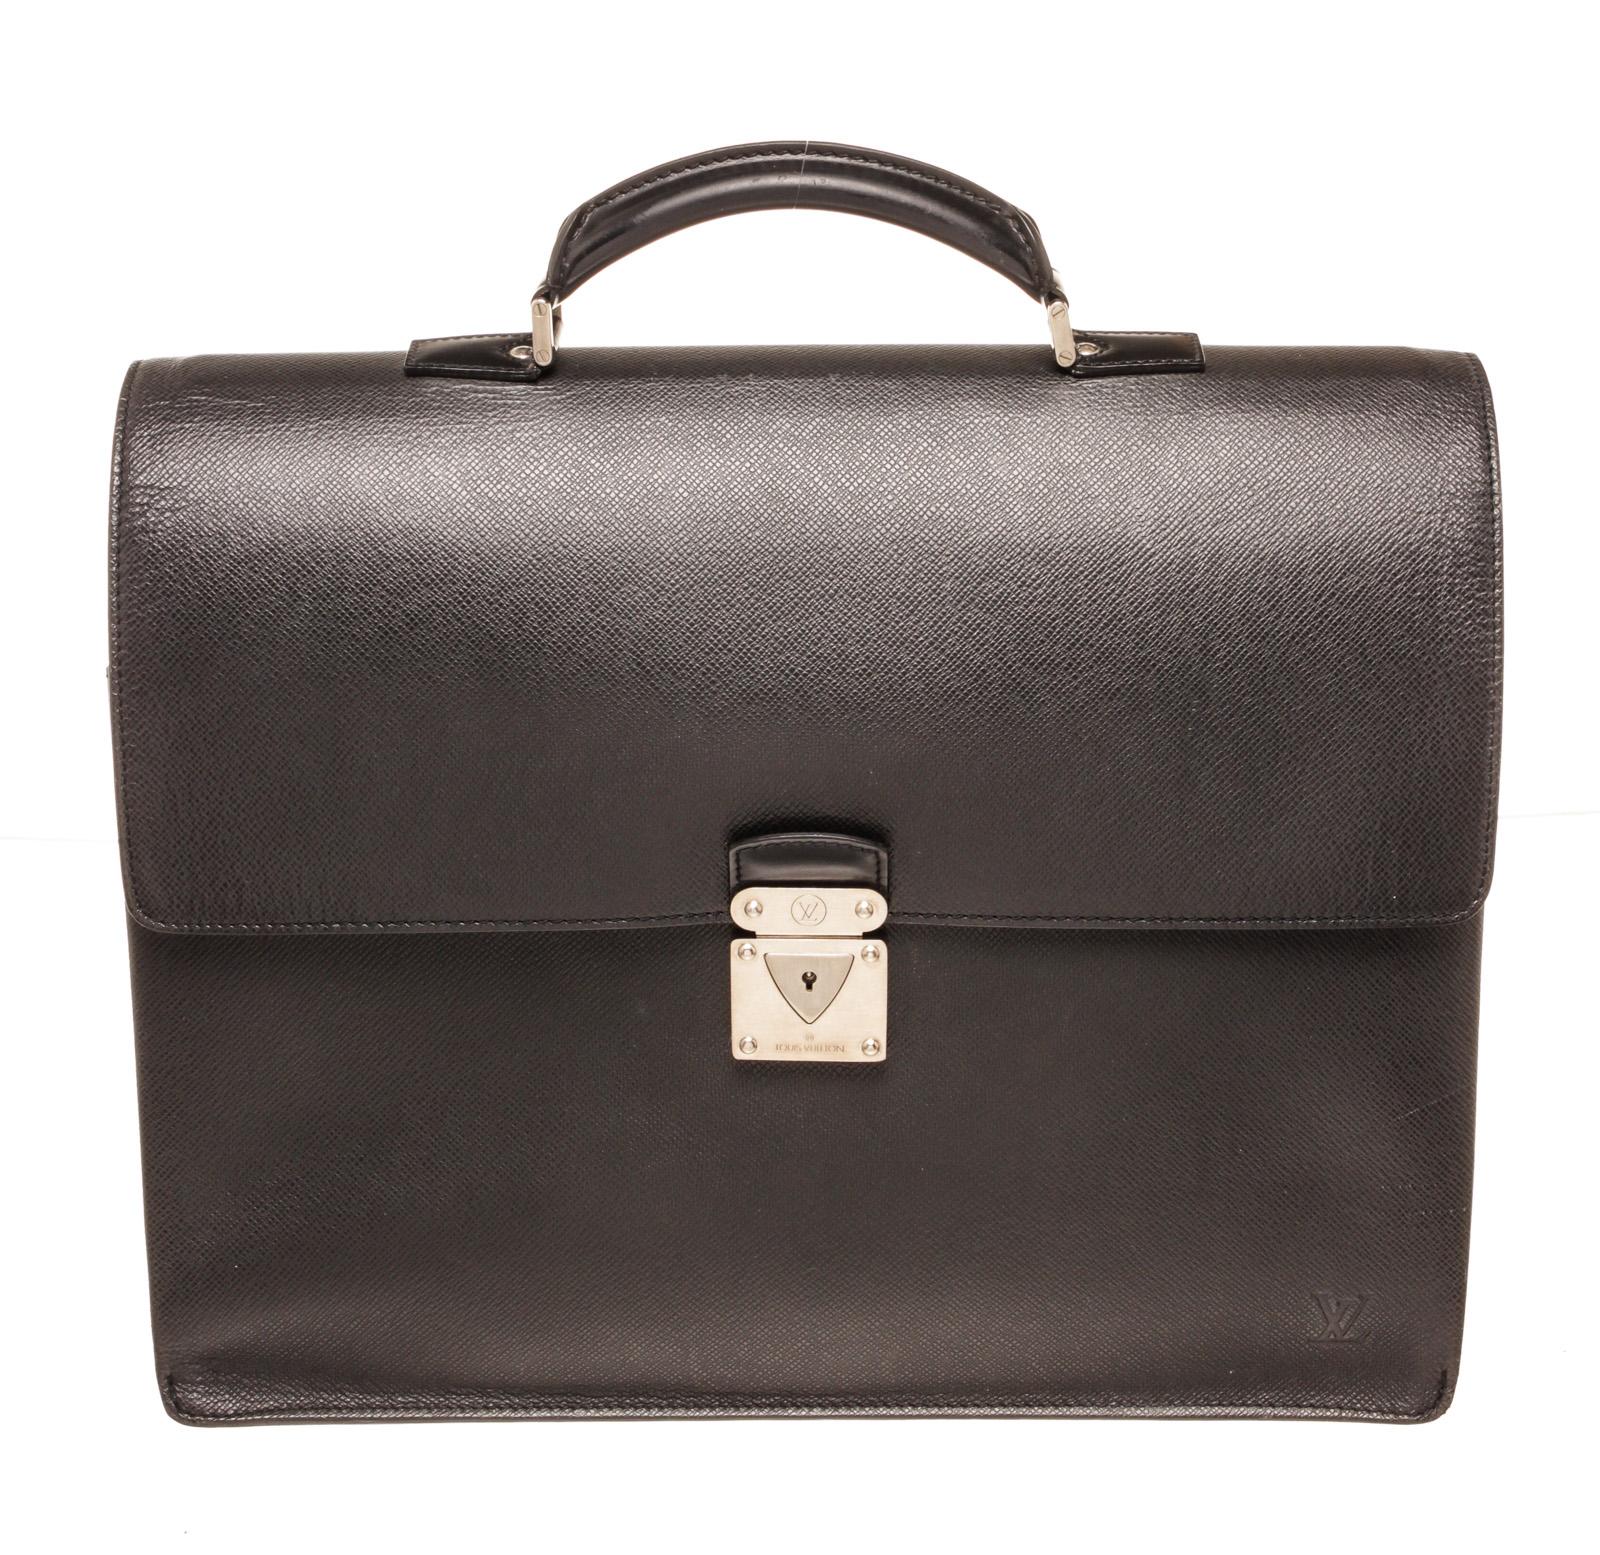 Louis Vuitton Black Taiga Leather Robusto 3 Briefcase Bag with taiga leather, silver-tone hardware, single rolled top handle, embossed logo accent at front corner, back exterior slit pocket, grey tonal canvas lining, three interior compartments; one